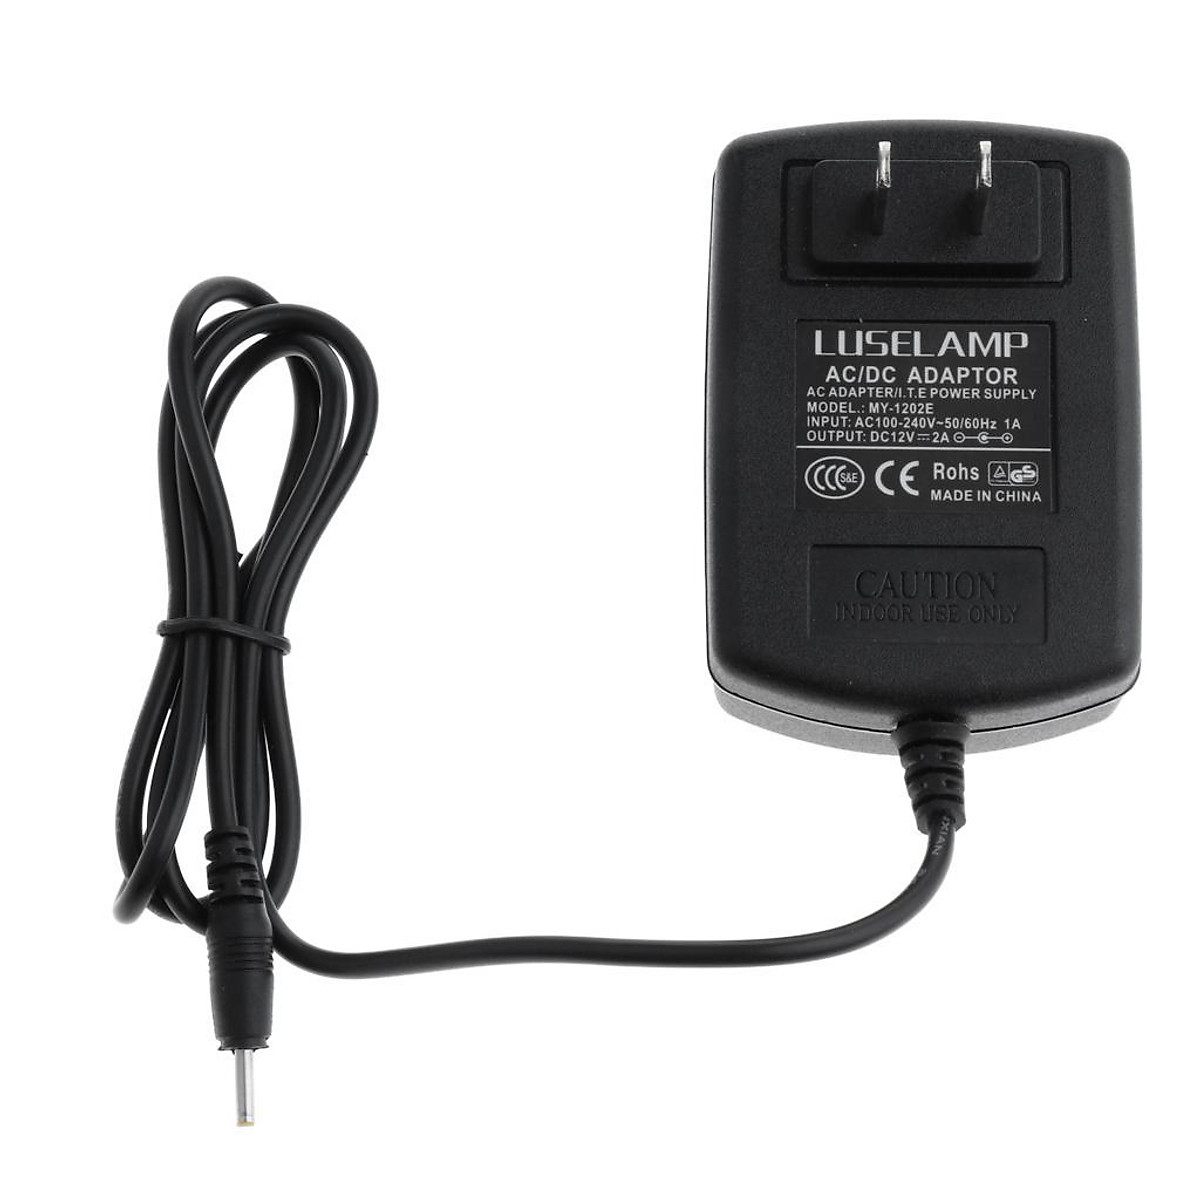 Mua US Plug AC 100-240V to DC 12V  Power Supply Charger Converter  Adapter tại Magideal2